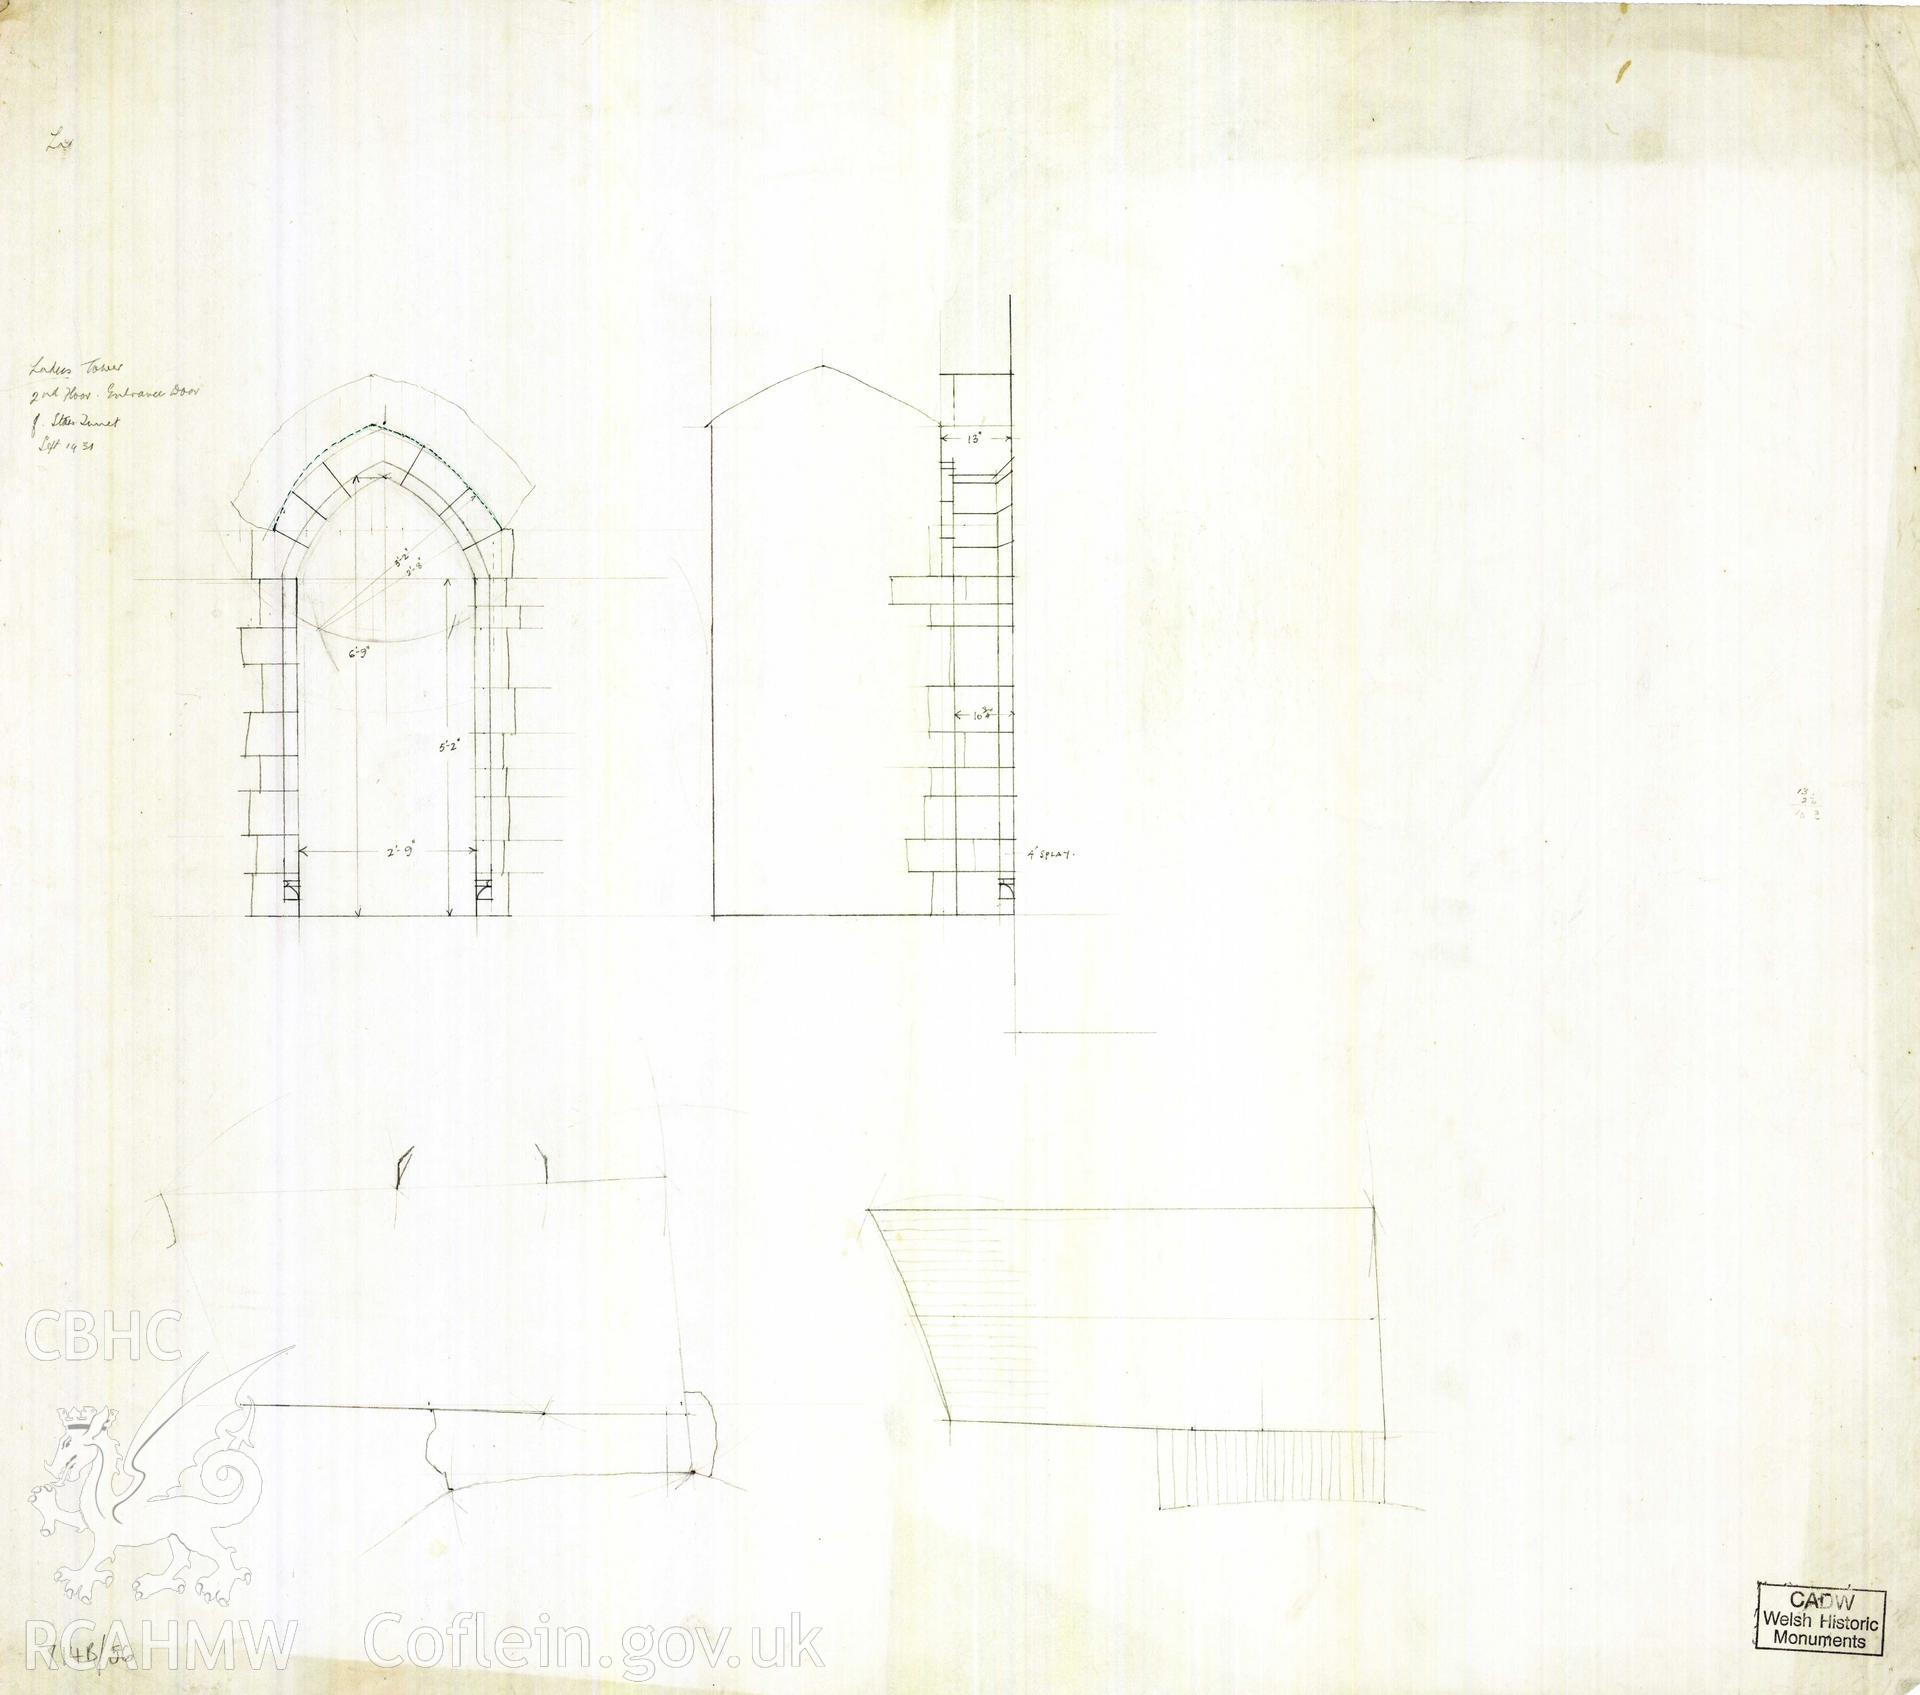 Digital copy of Cadw guardianship monument drawing of Caerphilly Castle. NW tower, top floor, stair door. Cadw ref. no: 714B/56. Scale 1:[12].  Original drawing withdrawn and returned to Cadw at their request.